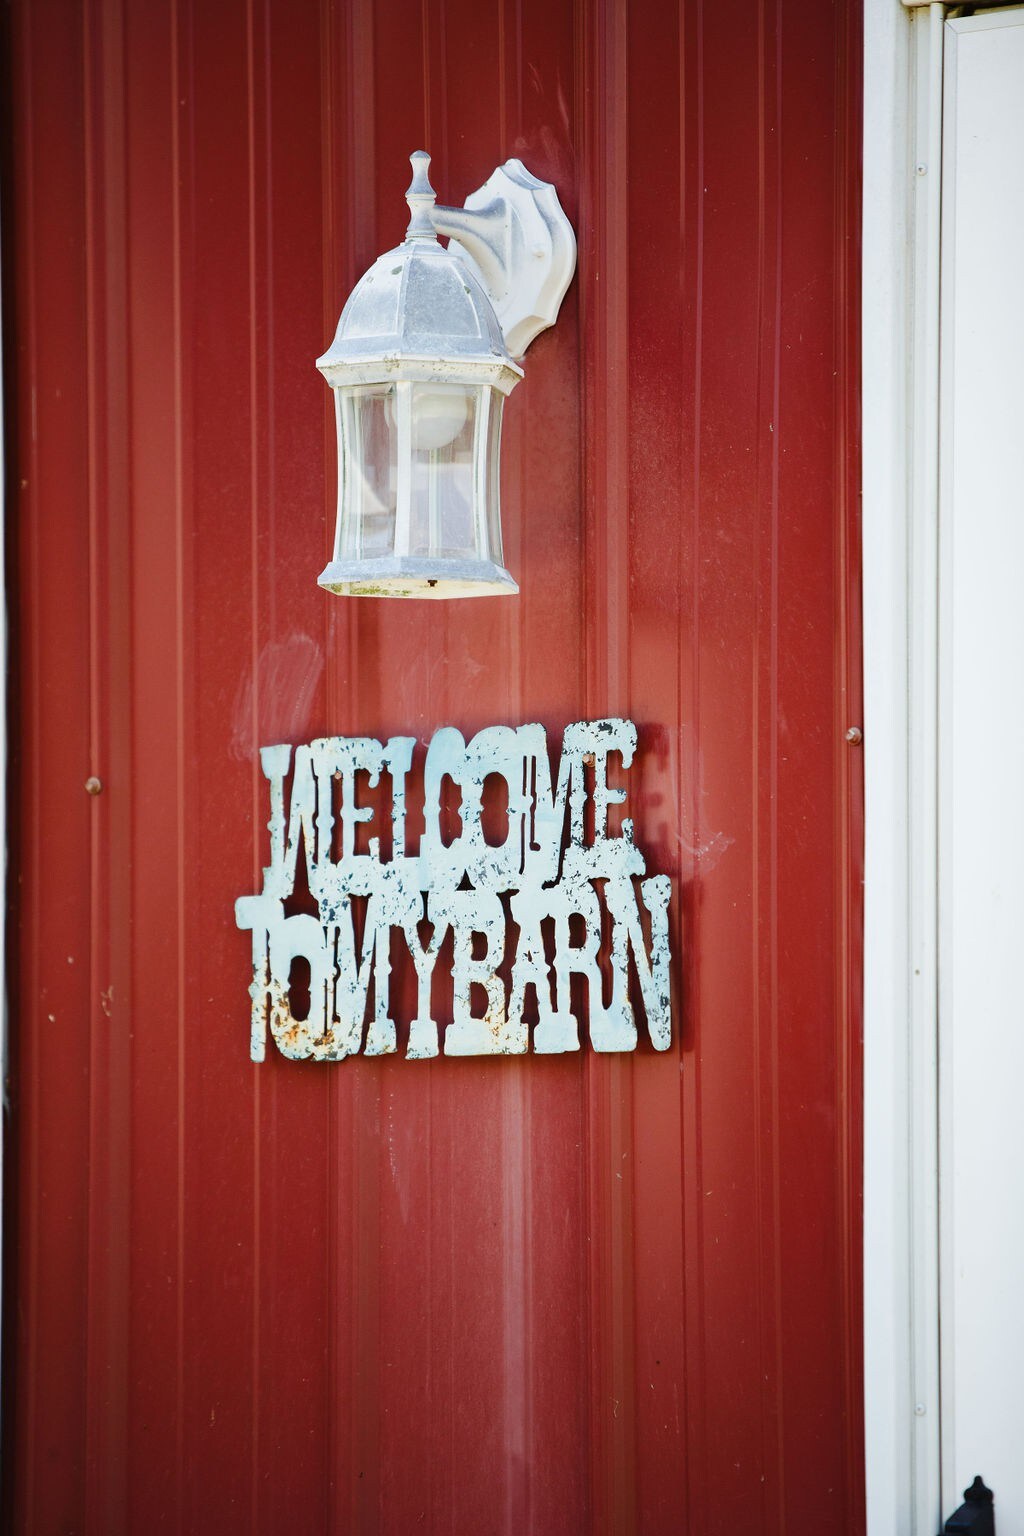 Come Live The Barn Life In Town!